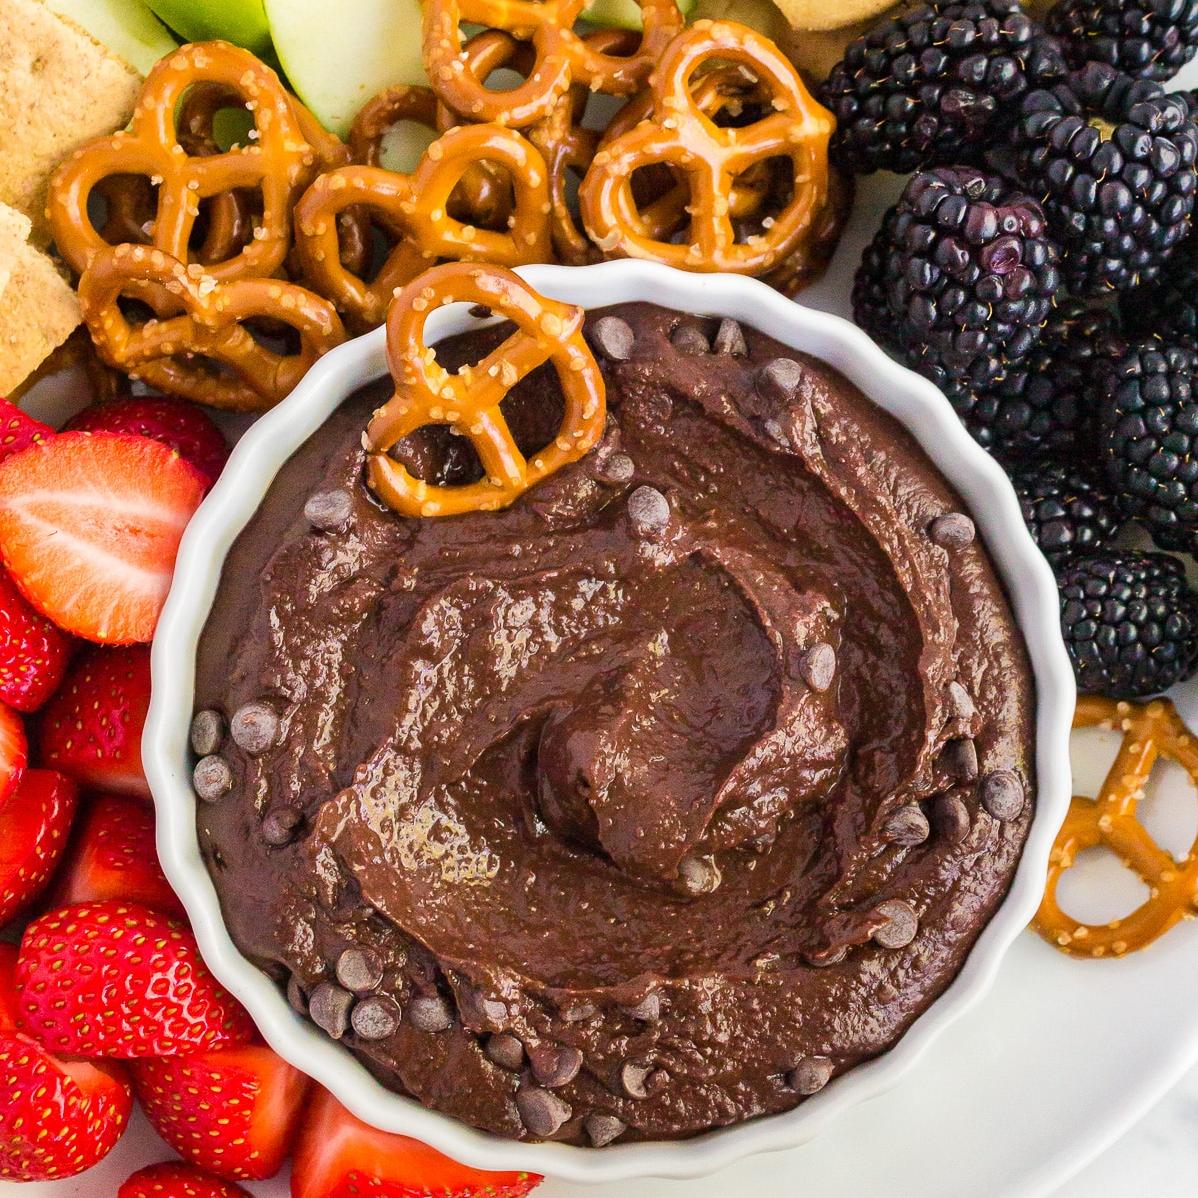  Have a scoop of this chocolate hummus with your favorite fruits, pretzels or crackers.